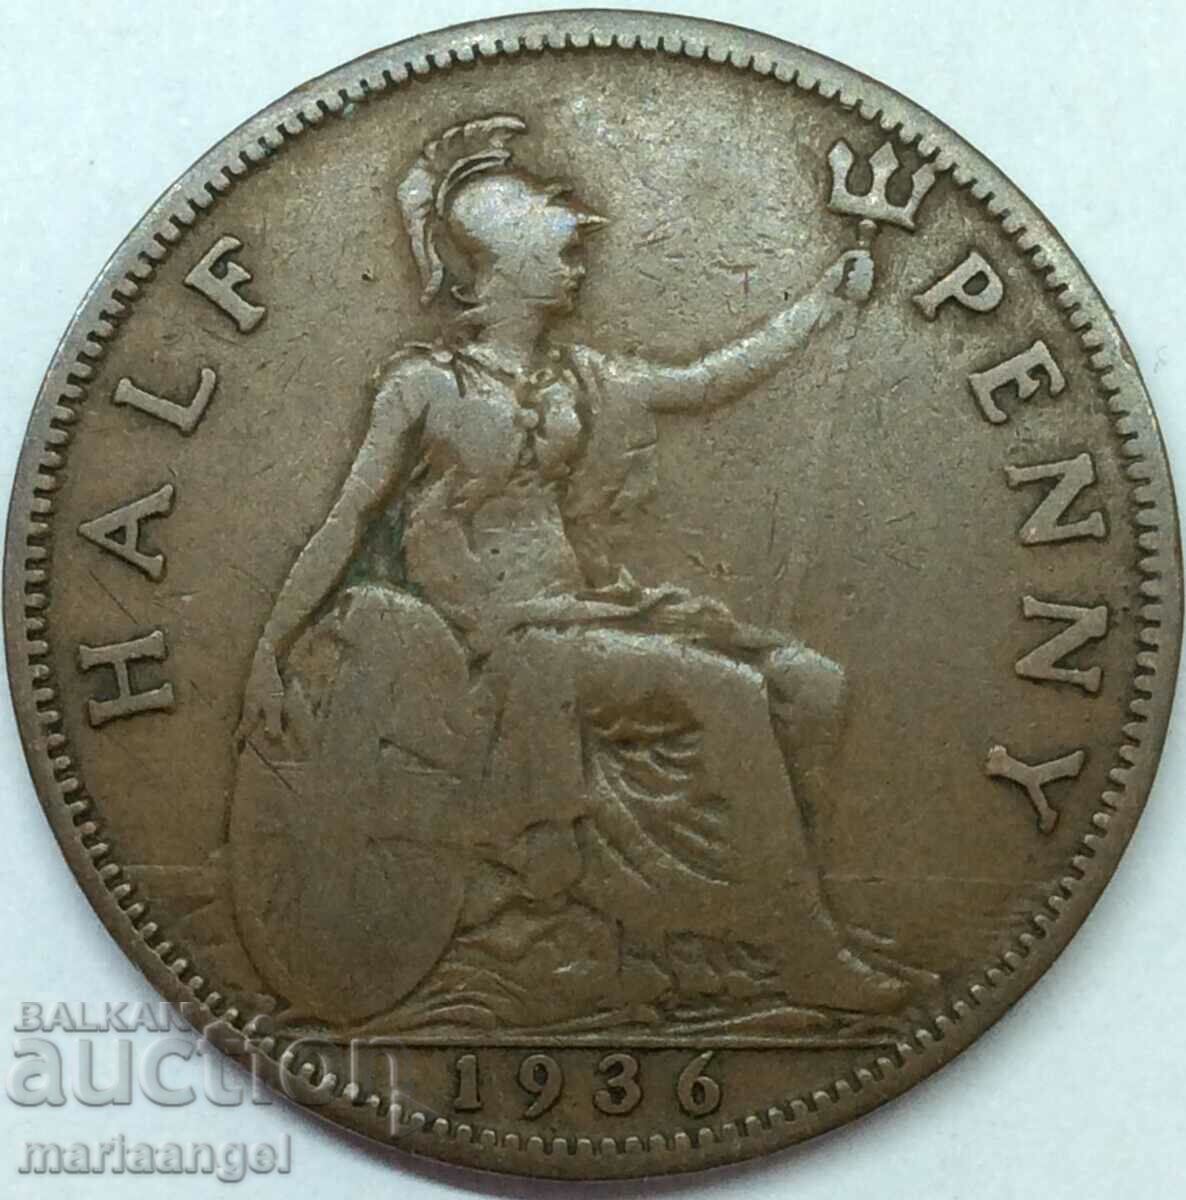 Great Britain 1/2 Penny 1936 George V 25mm Bronze